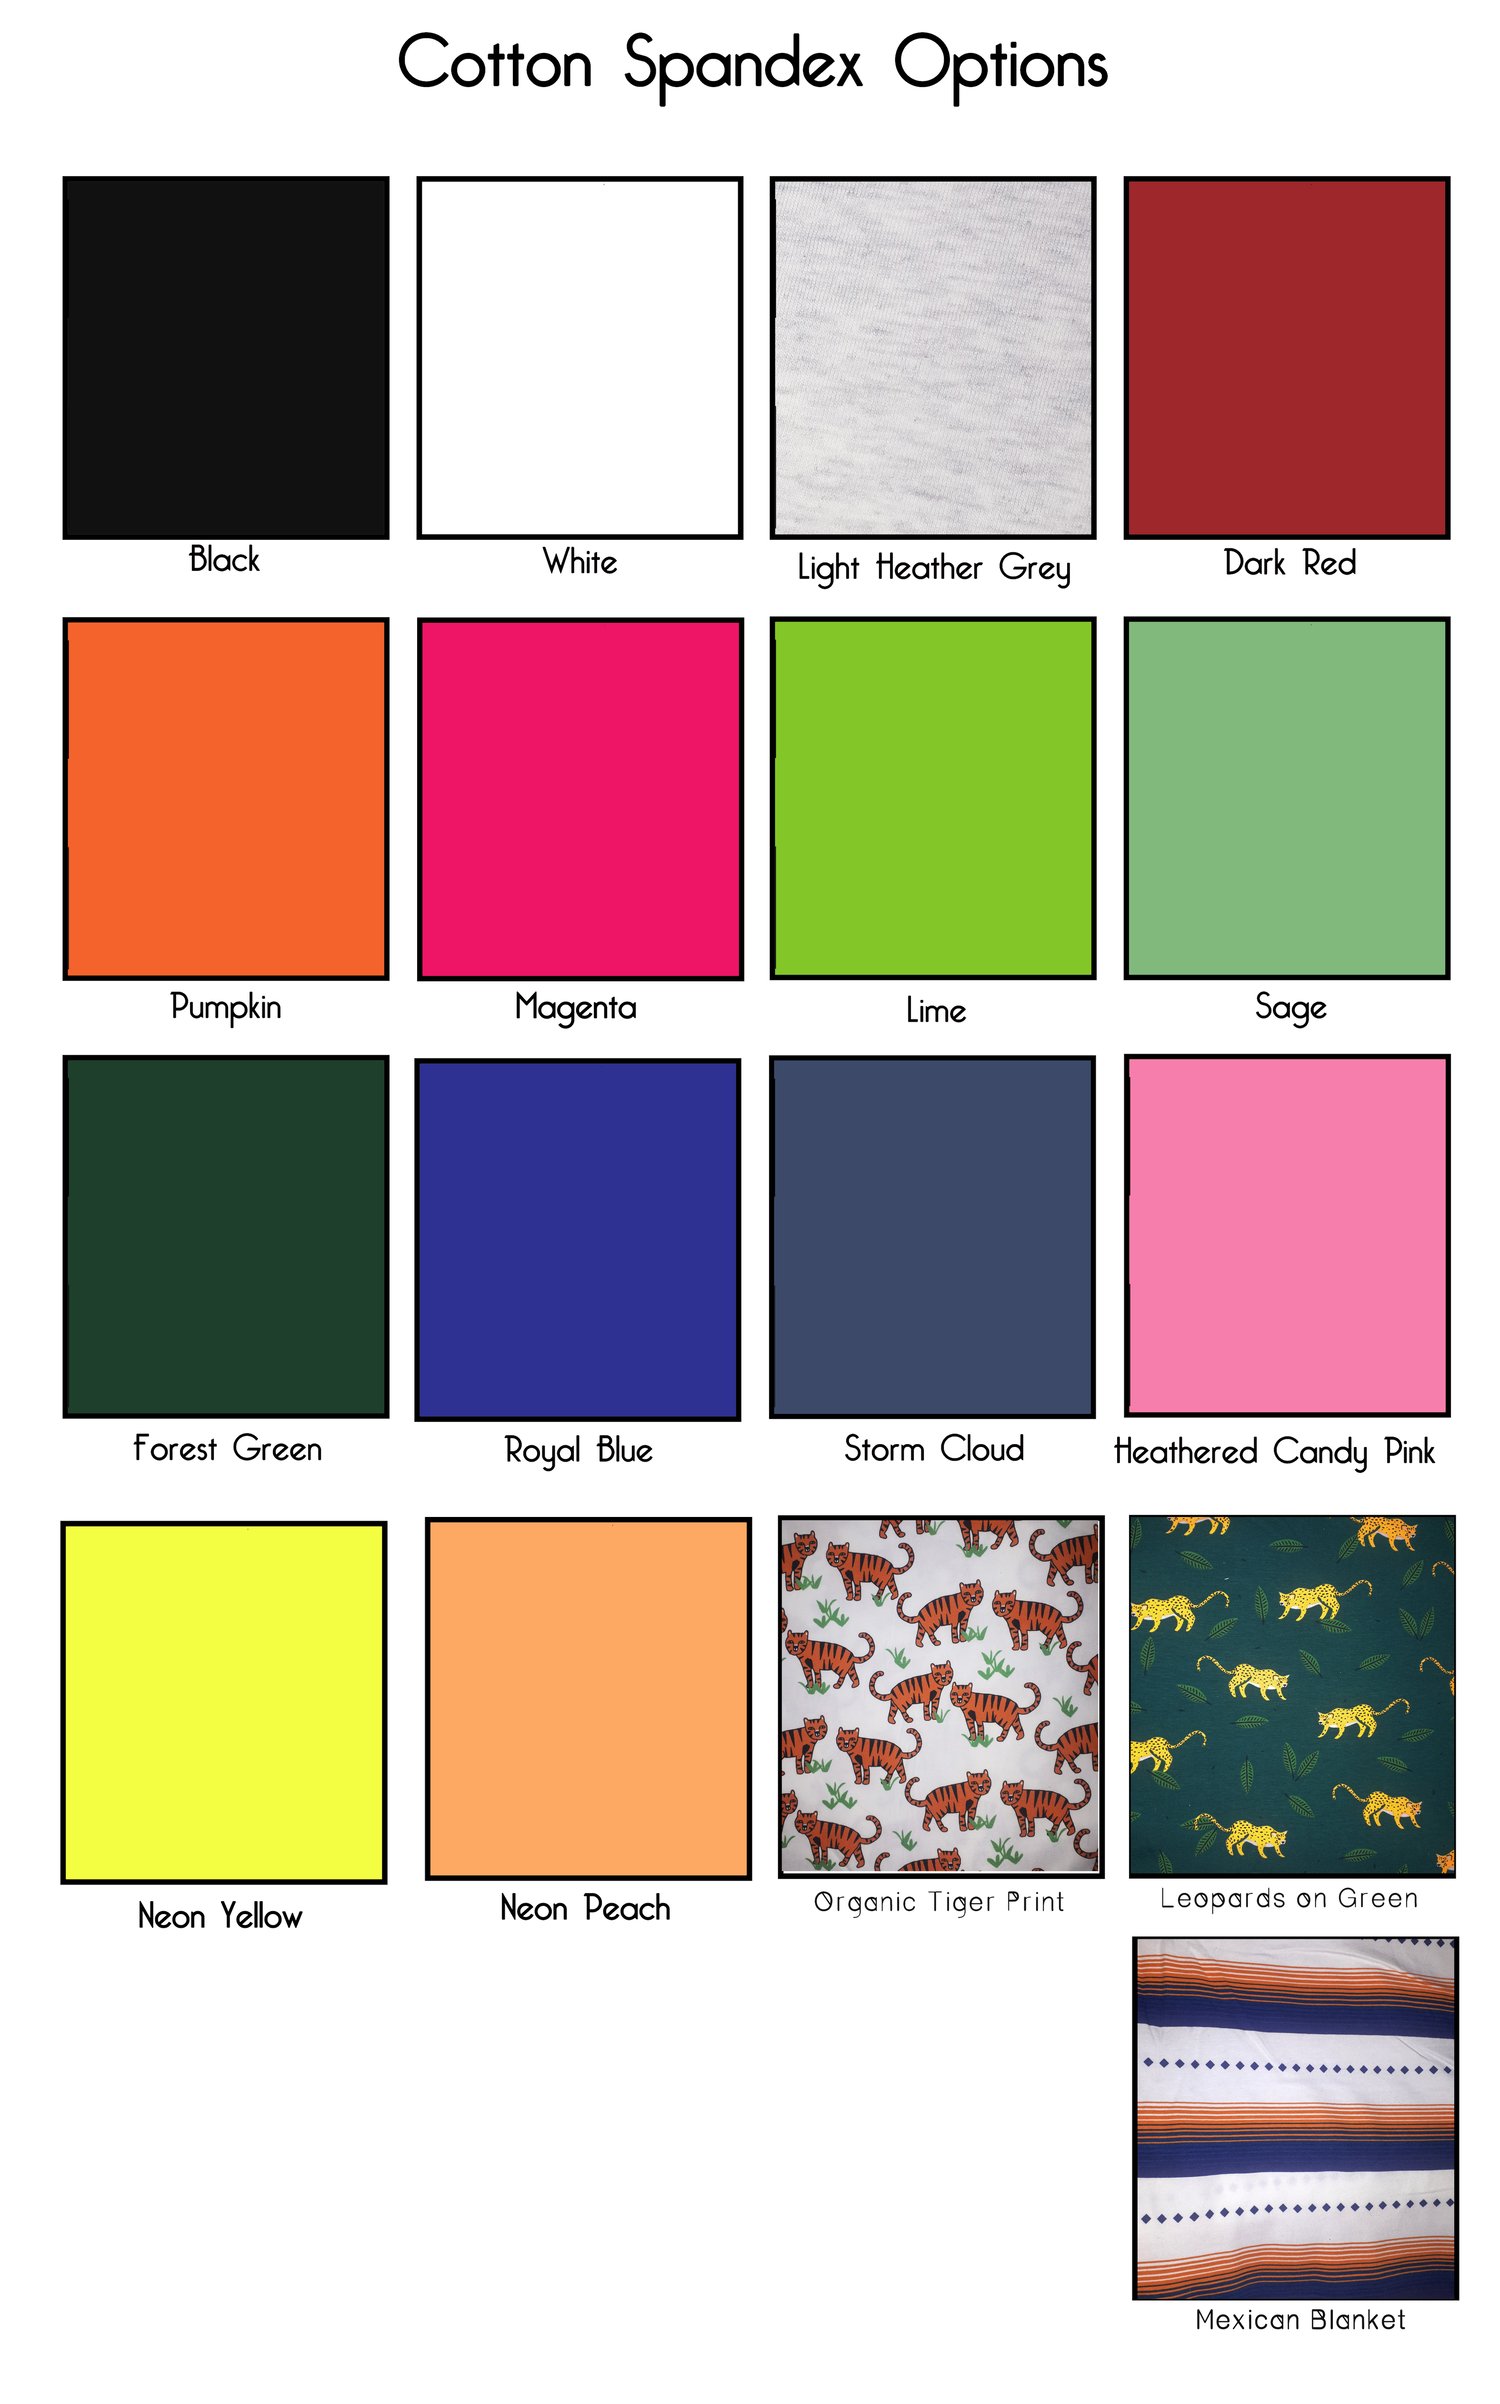 Image of Cotton Spandex Suspenderware with Different Fabric Options